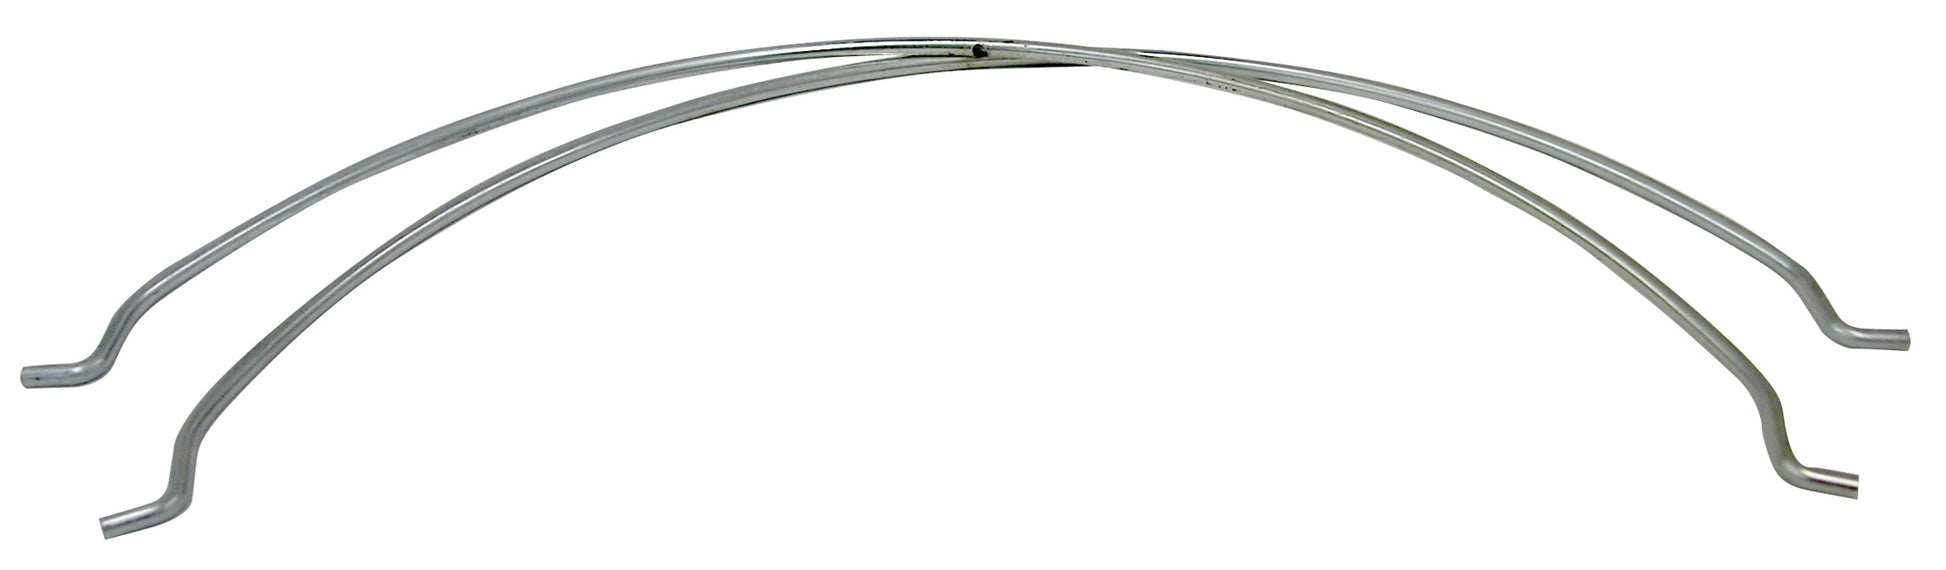 Clamp Lamp 10 Inch Wire guard